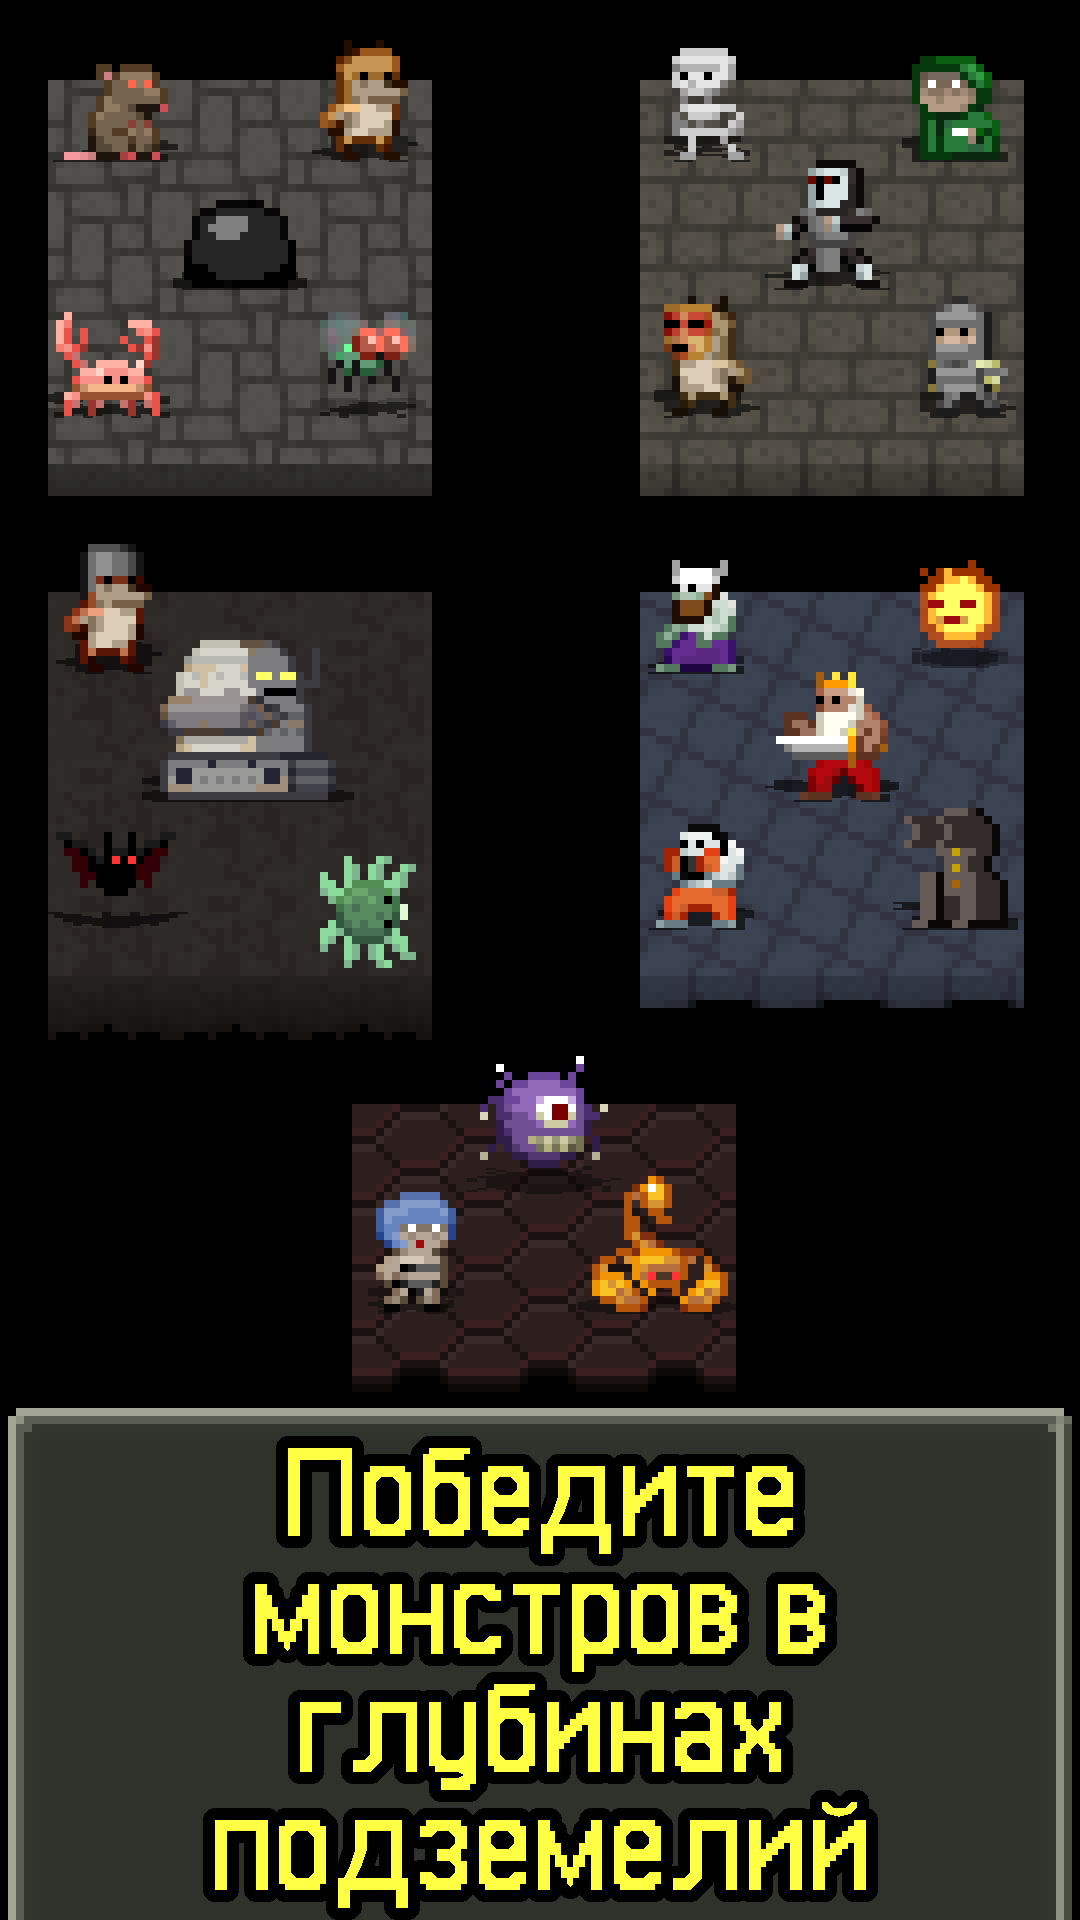 shattered pixel dungeon challenged